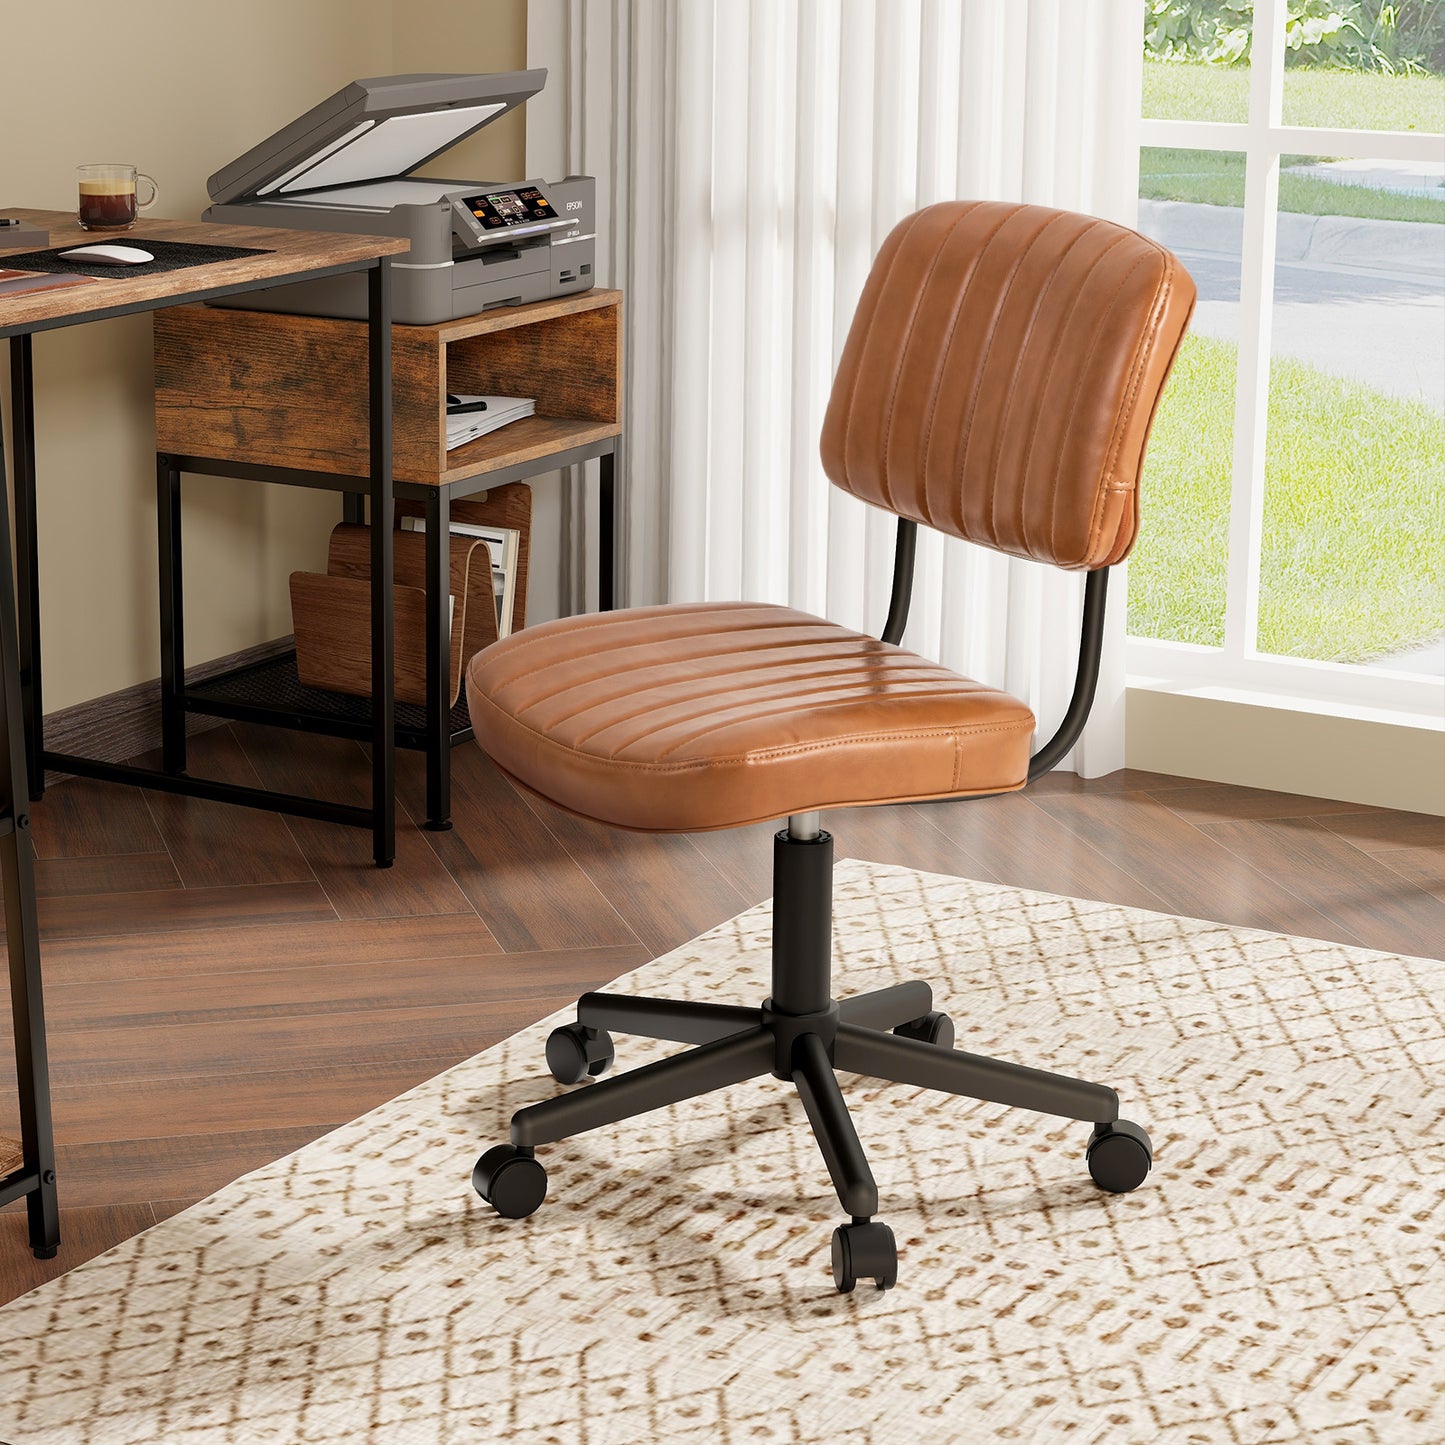 PU Leather Adjustable Office Chair Swivel Task Chair with Backrest-Orange